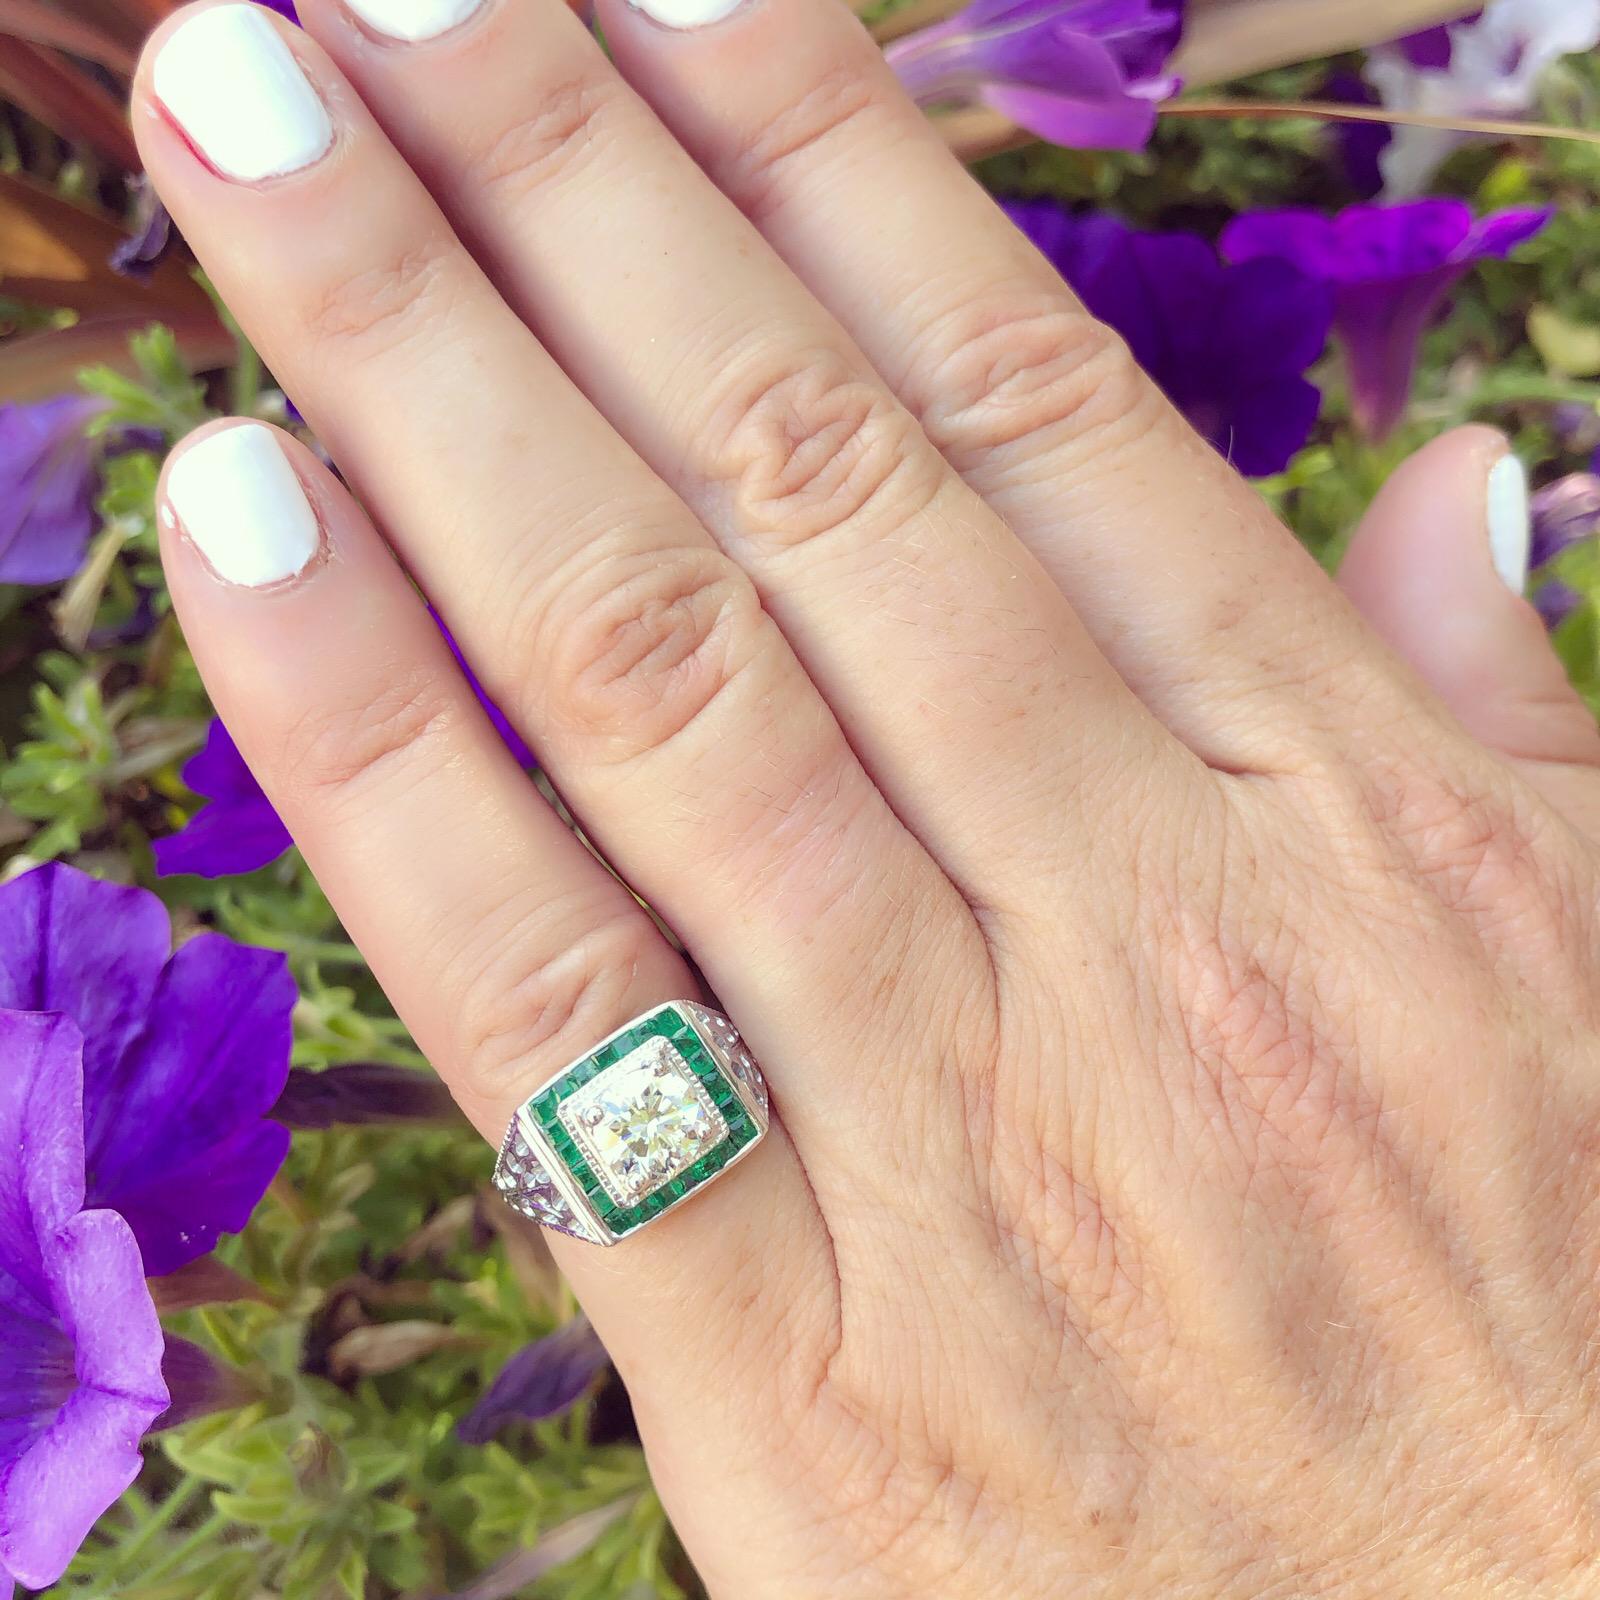 With vintage flair, this 18k white gold square halo ring is unique and wearable. Centering a 1.01 carat round brilliant-cut diamond, framed within a halo of 22 square-cut emeralds, with wide pierced shoulders which add a delicate, lacy look. The